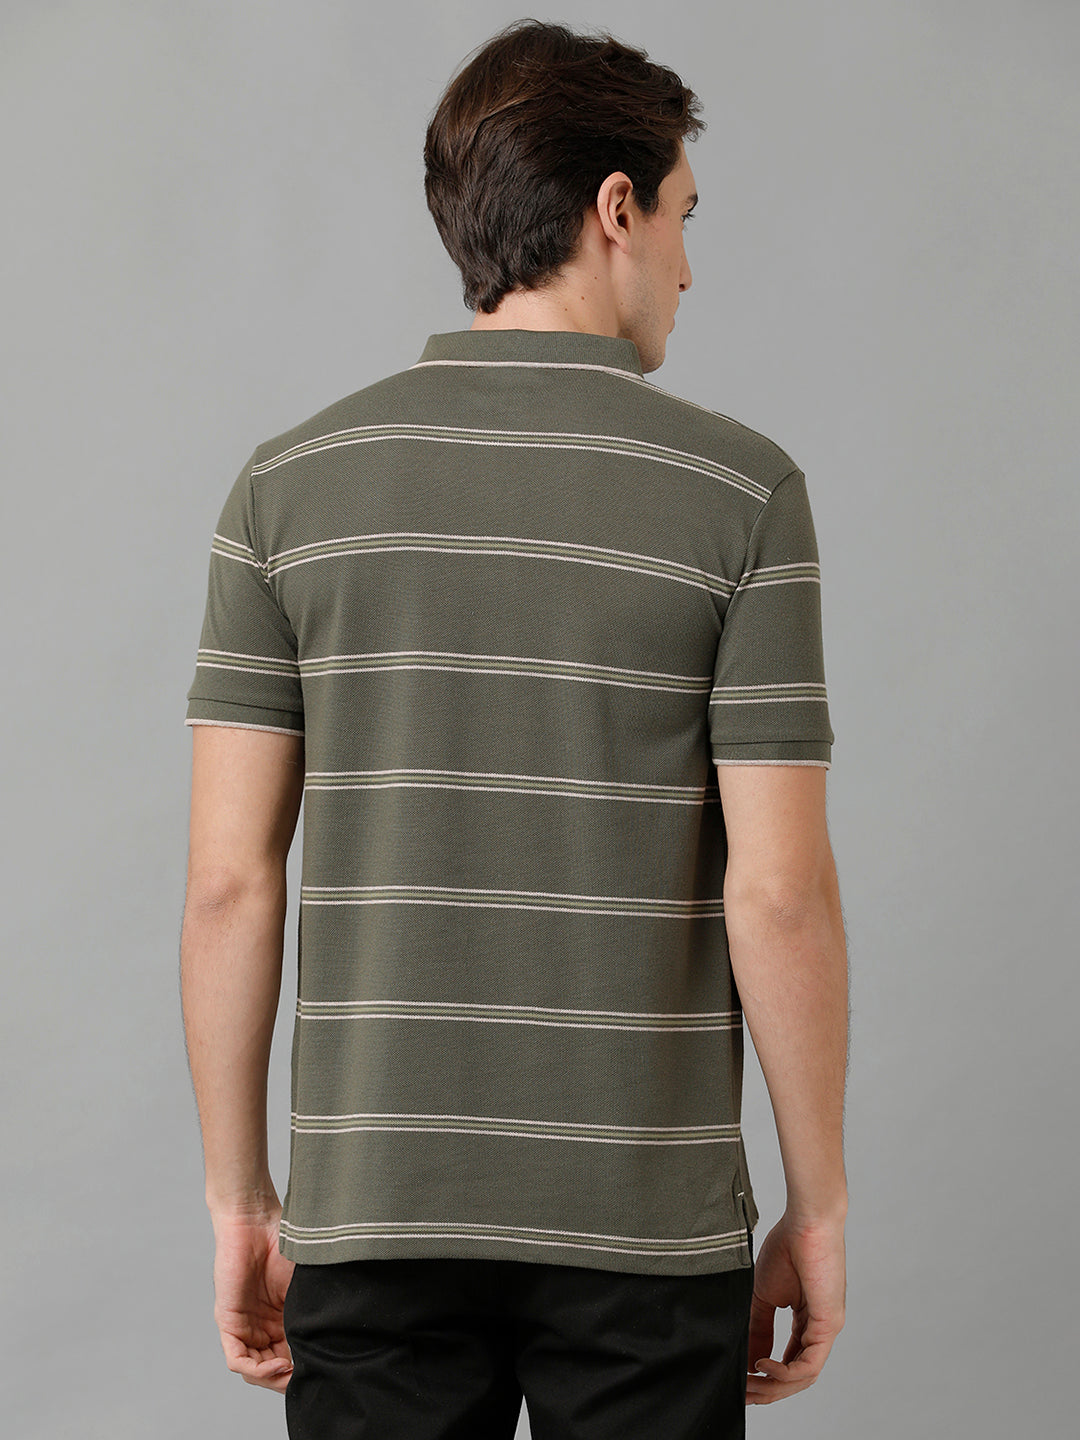 Classic Polo Men's Cotton Blend Striped Half Sleeve Slim Fit Polo Neck Olive Color T-Shirt | Adore - 198 A